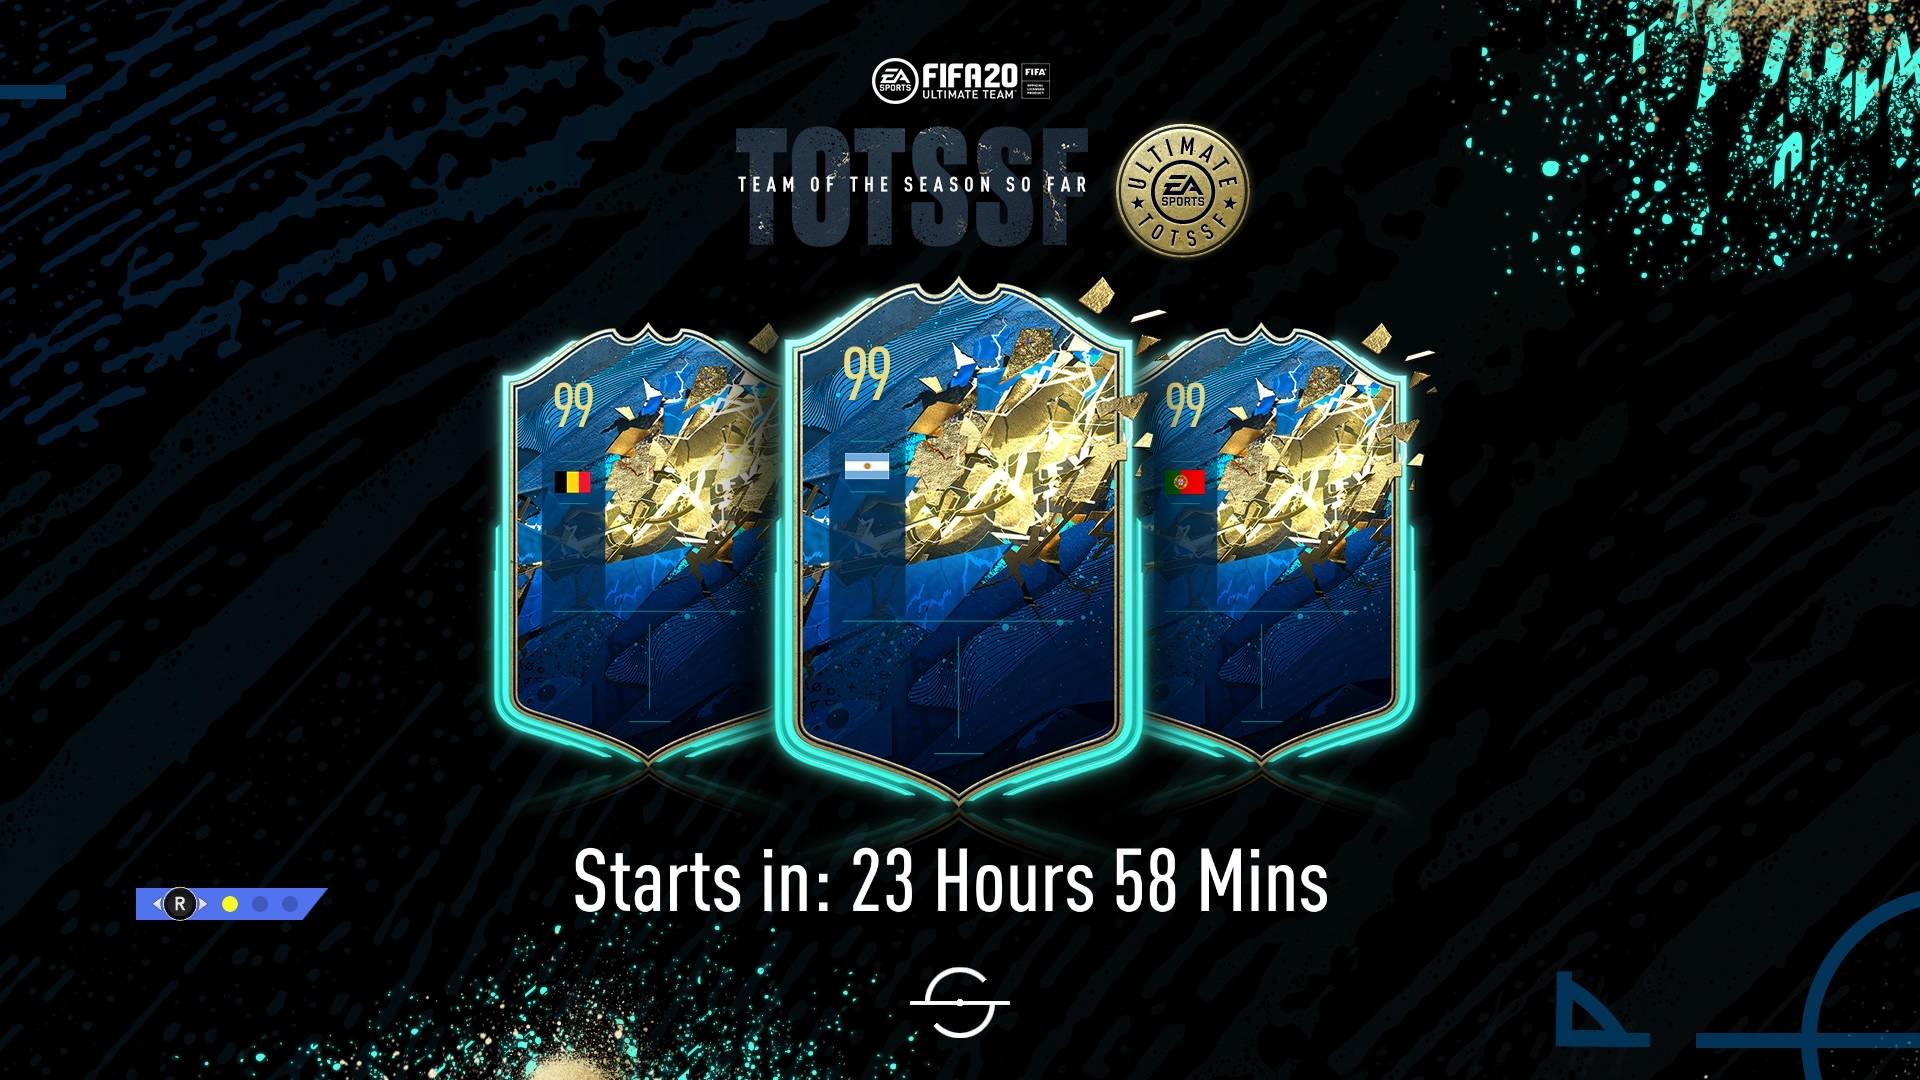 The FIFA 20 Ultimate Team loading screen is now teasing the final Team of the Season (TOTS) So Far squad. 